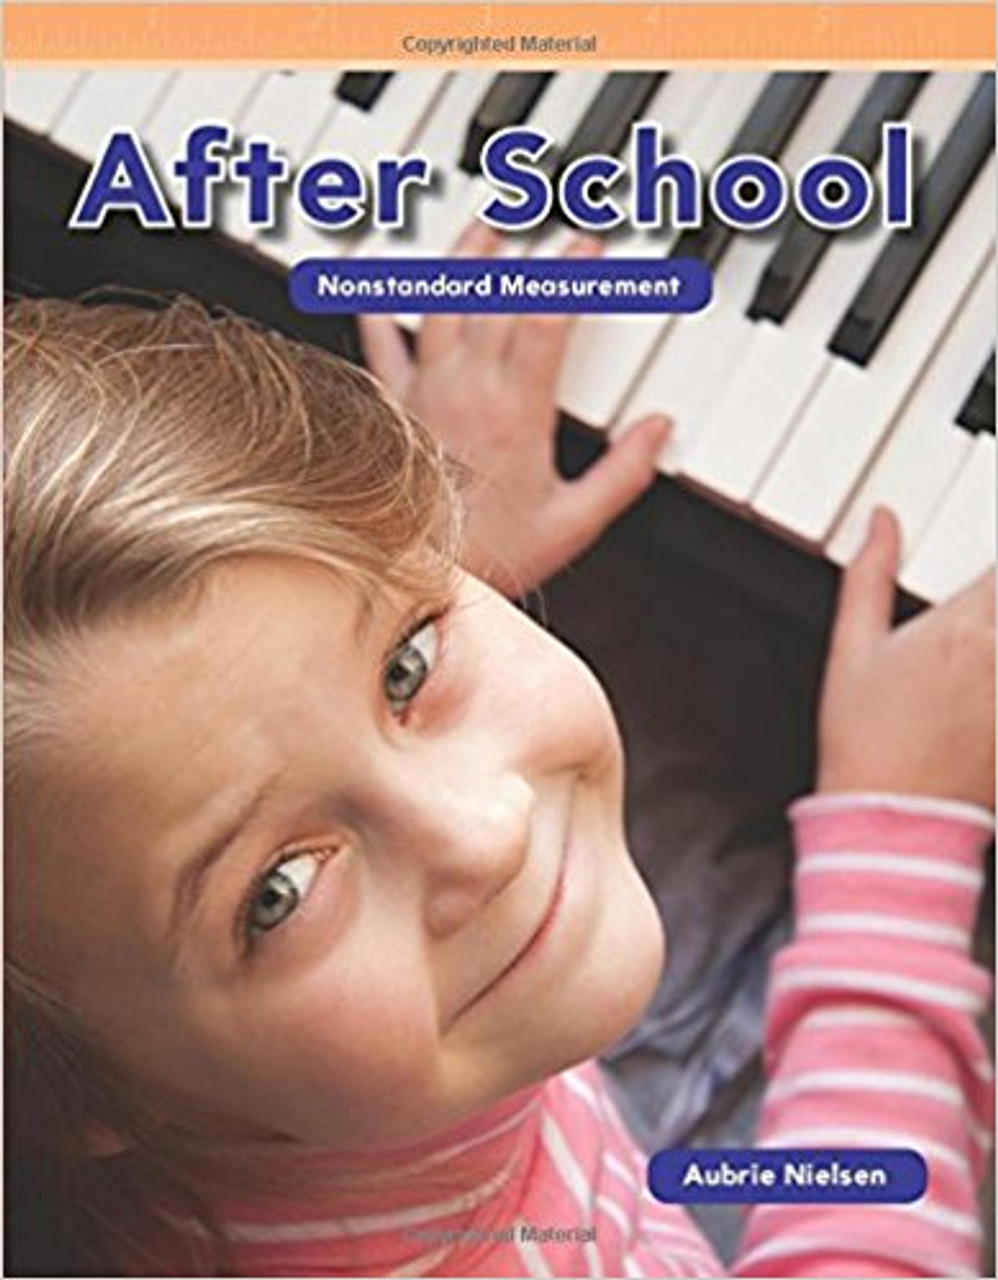 Learn the basics of nonstandard measurement after school! This book shows young readers that they can measure all sorts of after school activities with nonstandard measurements. A violin is five hands long! A piano is six shoes tall! These fun measurement examples, along with engaging "You Try It!" problems, will encourage children to measure their after school activities and will improve their understanding of early STEM concepts.